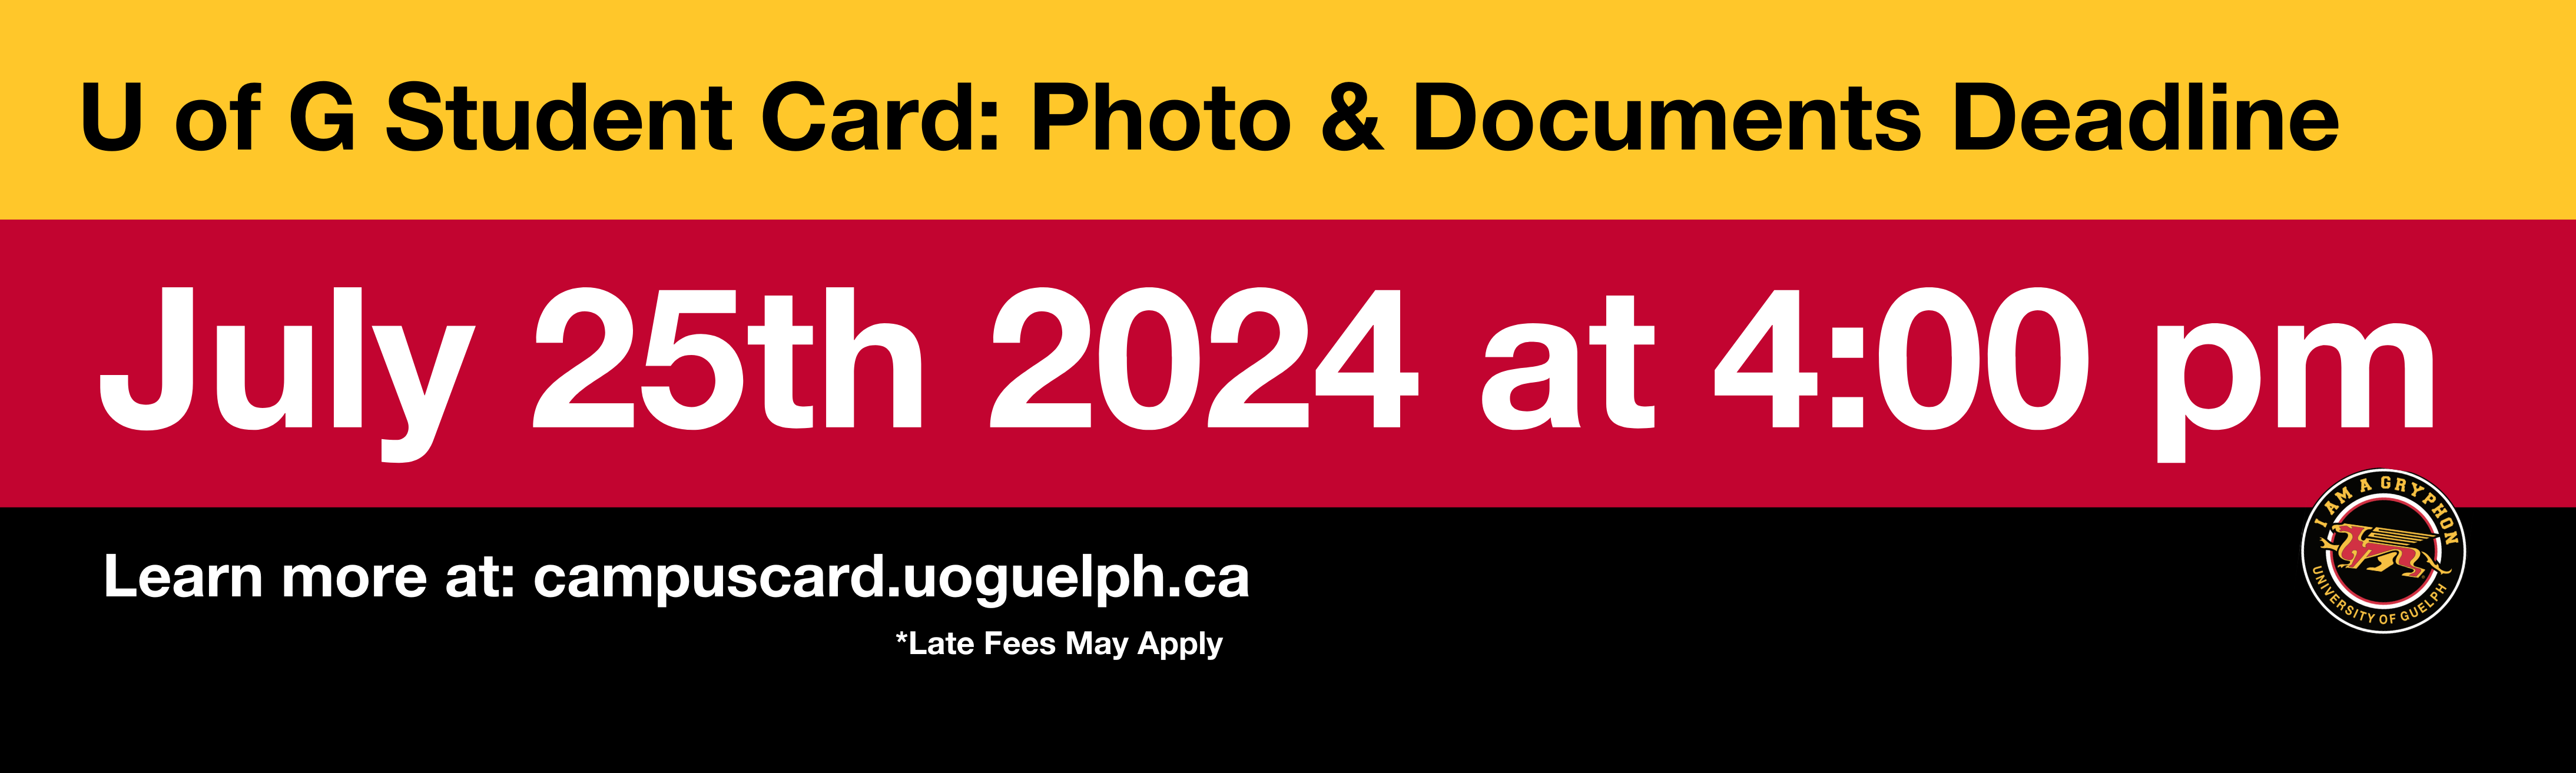 Banner for U of G Student Card Deadline: The deadline for submitting photos and documents is July 25th, 2024, at 4:00 pm. For more information, visit campuscard.uoguelph.ca. Note: Late fees may apply.